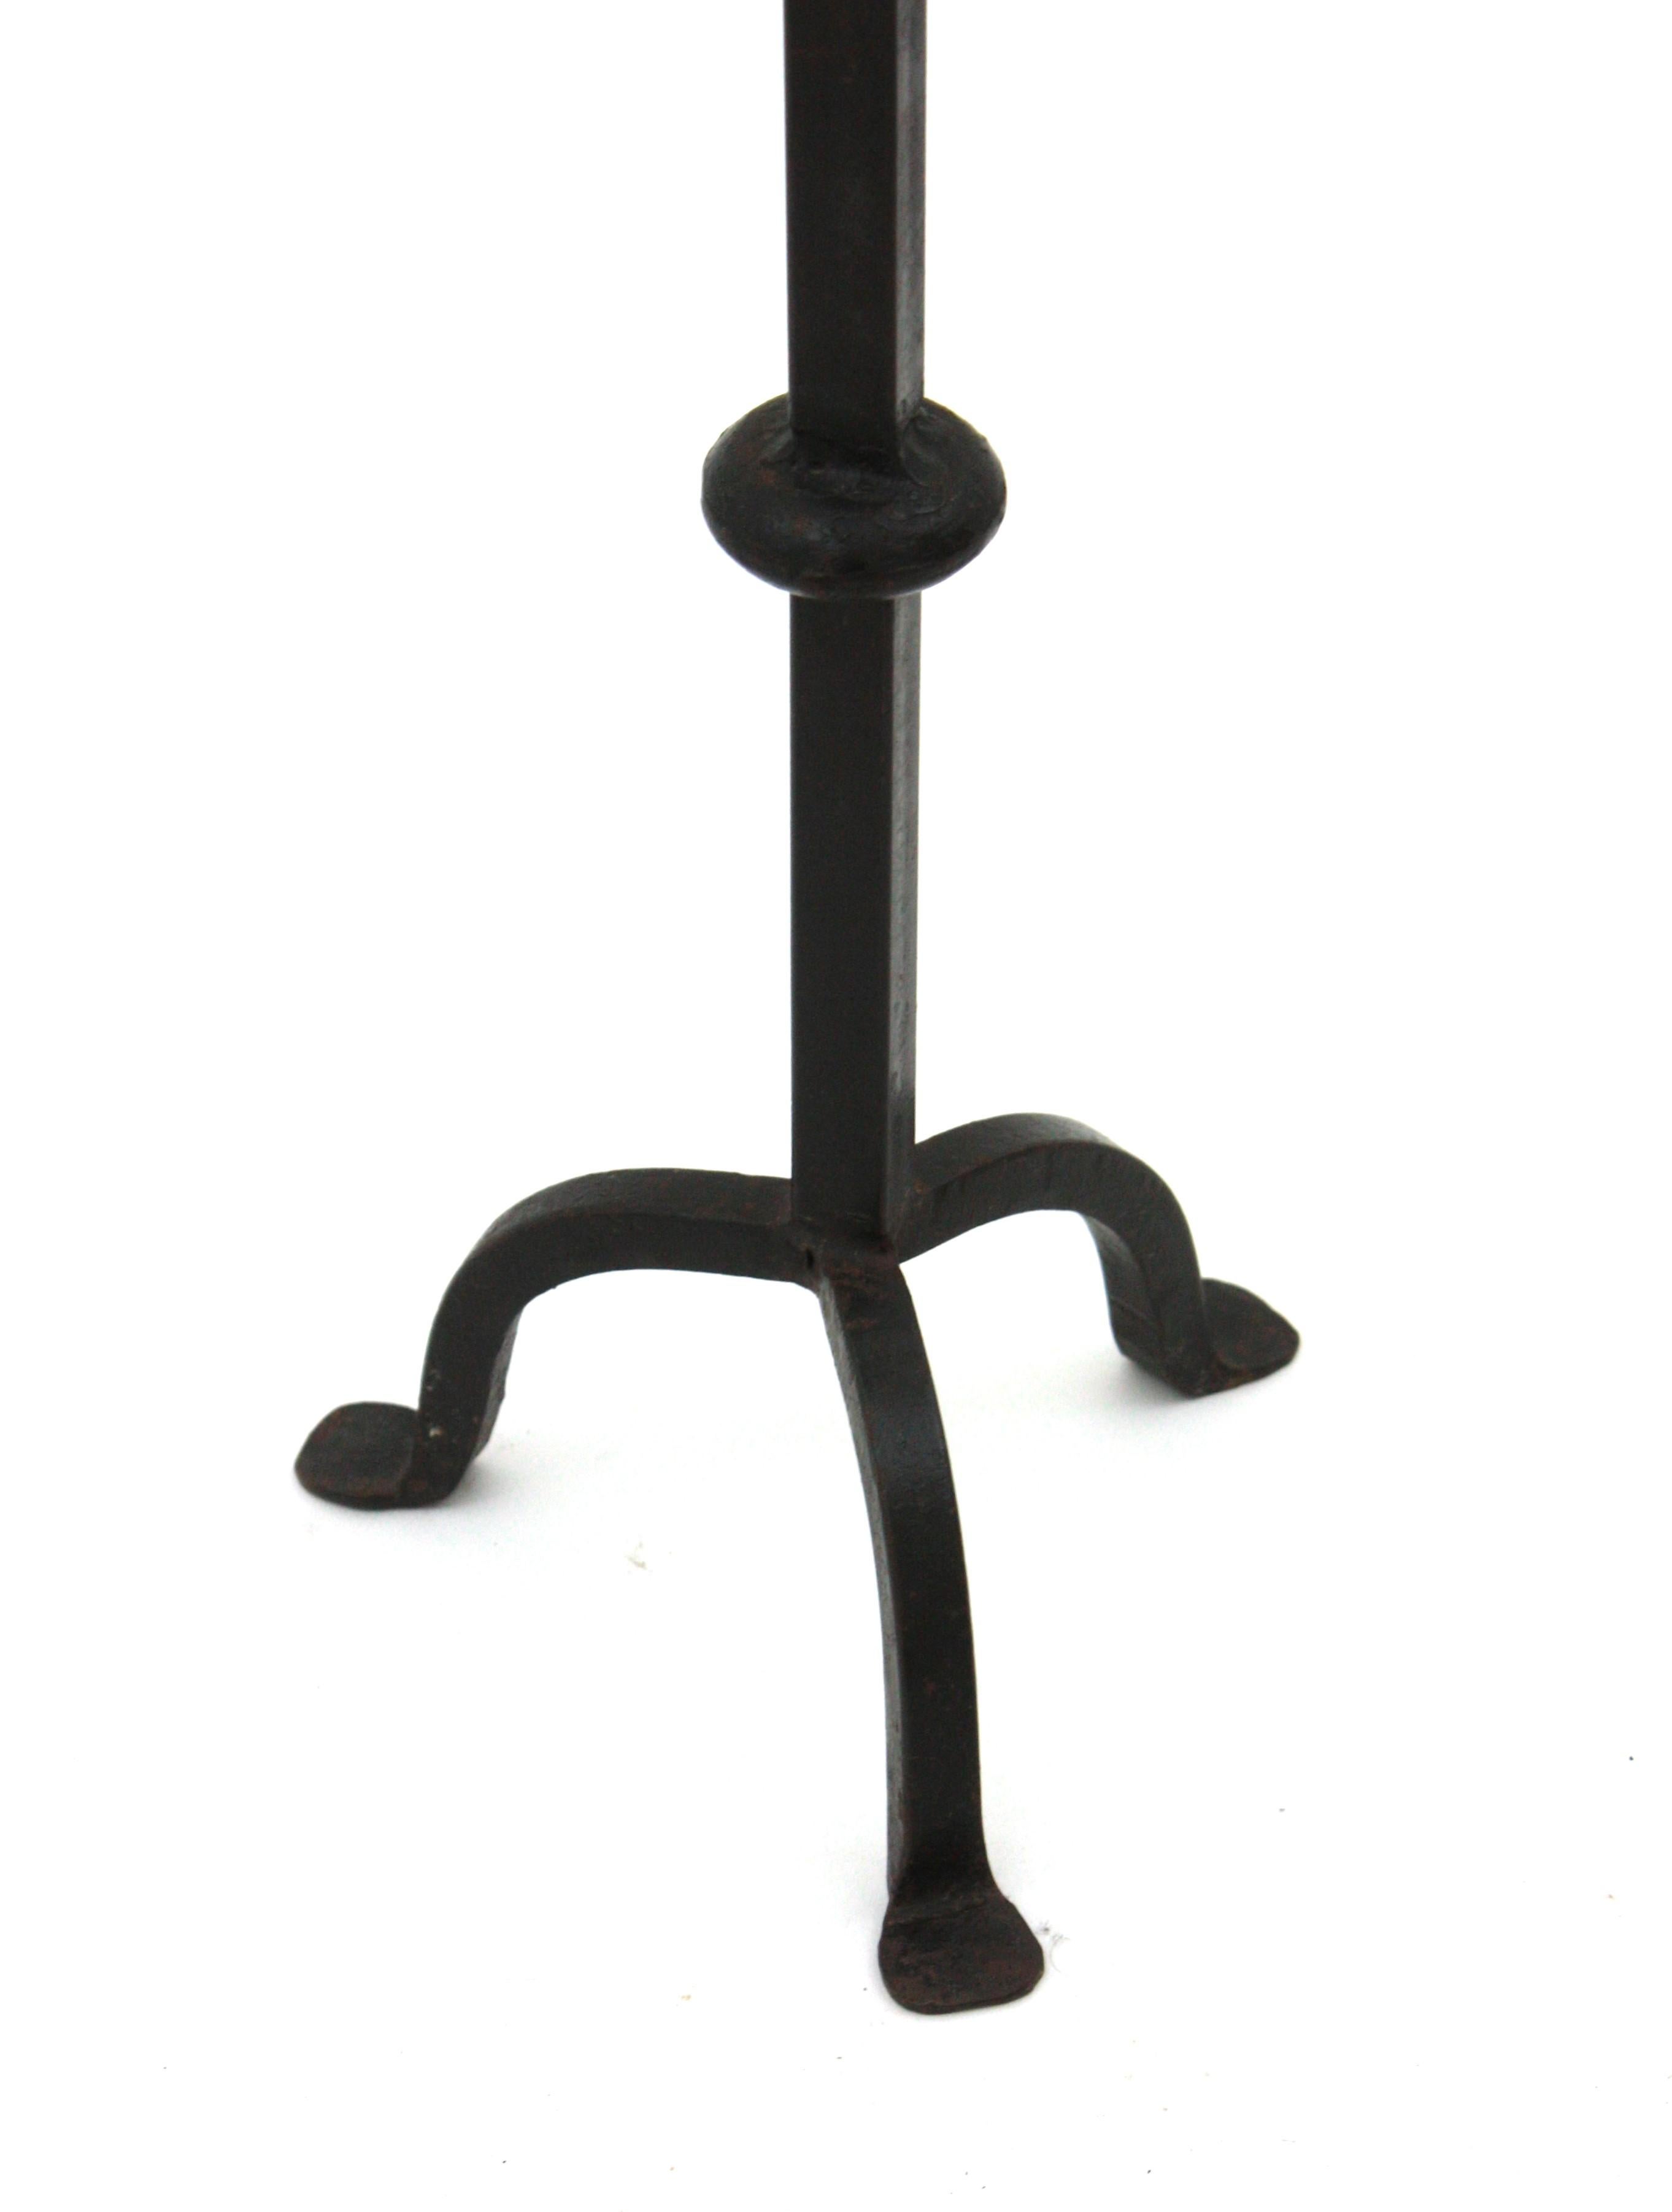 Spanish Medieval Hand Forged Iron Candle Stand / Floor Candle Holder For Sale 3